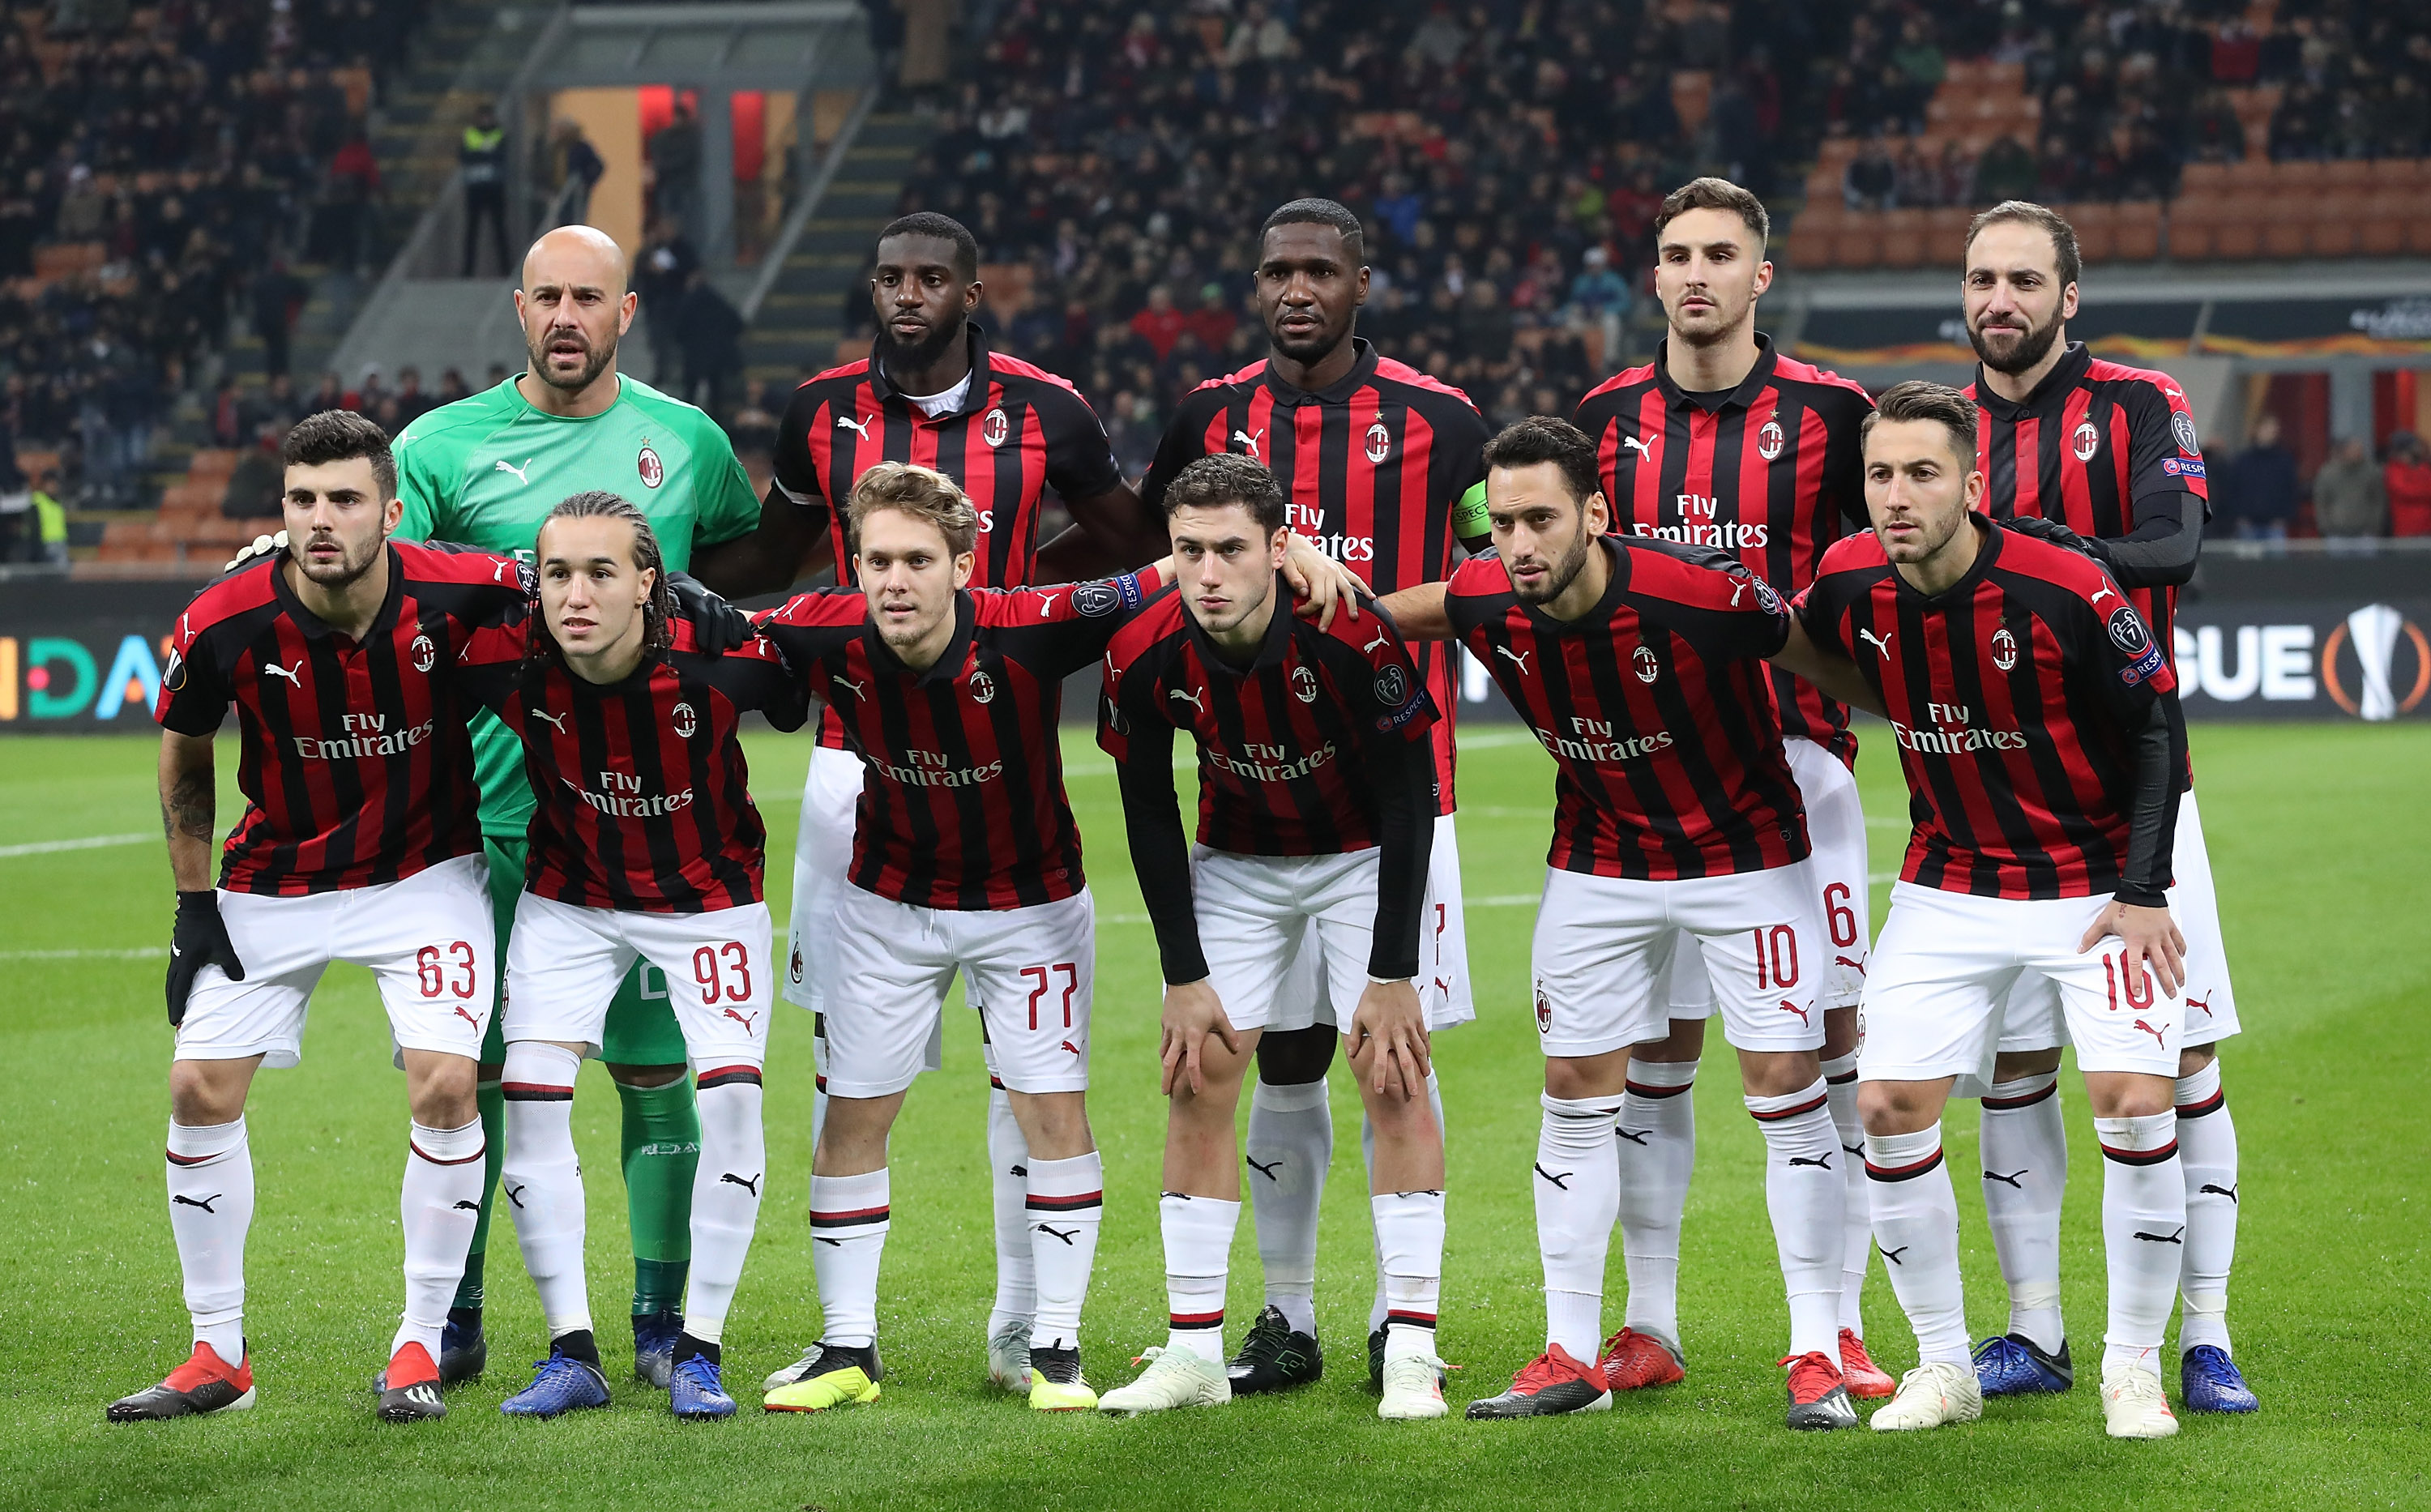 MILAN, ITALY - NOVEMBER 29: AC Milan team line up before the UEFA Europa League Group F match between AC Milan and F91 Dudelange at Stadio Giuseppe Meazza on November 29, 2018 in Milan, Italy. (Photo by Marco Luzzani/Getty Images)